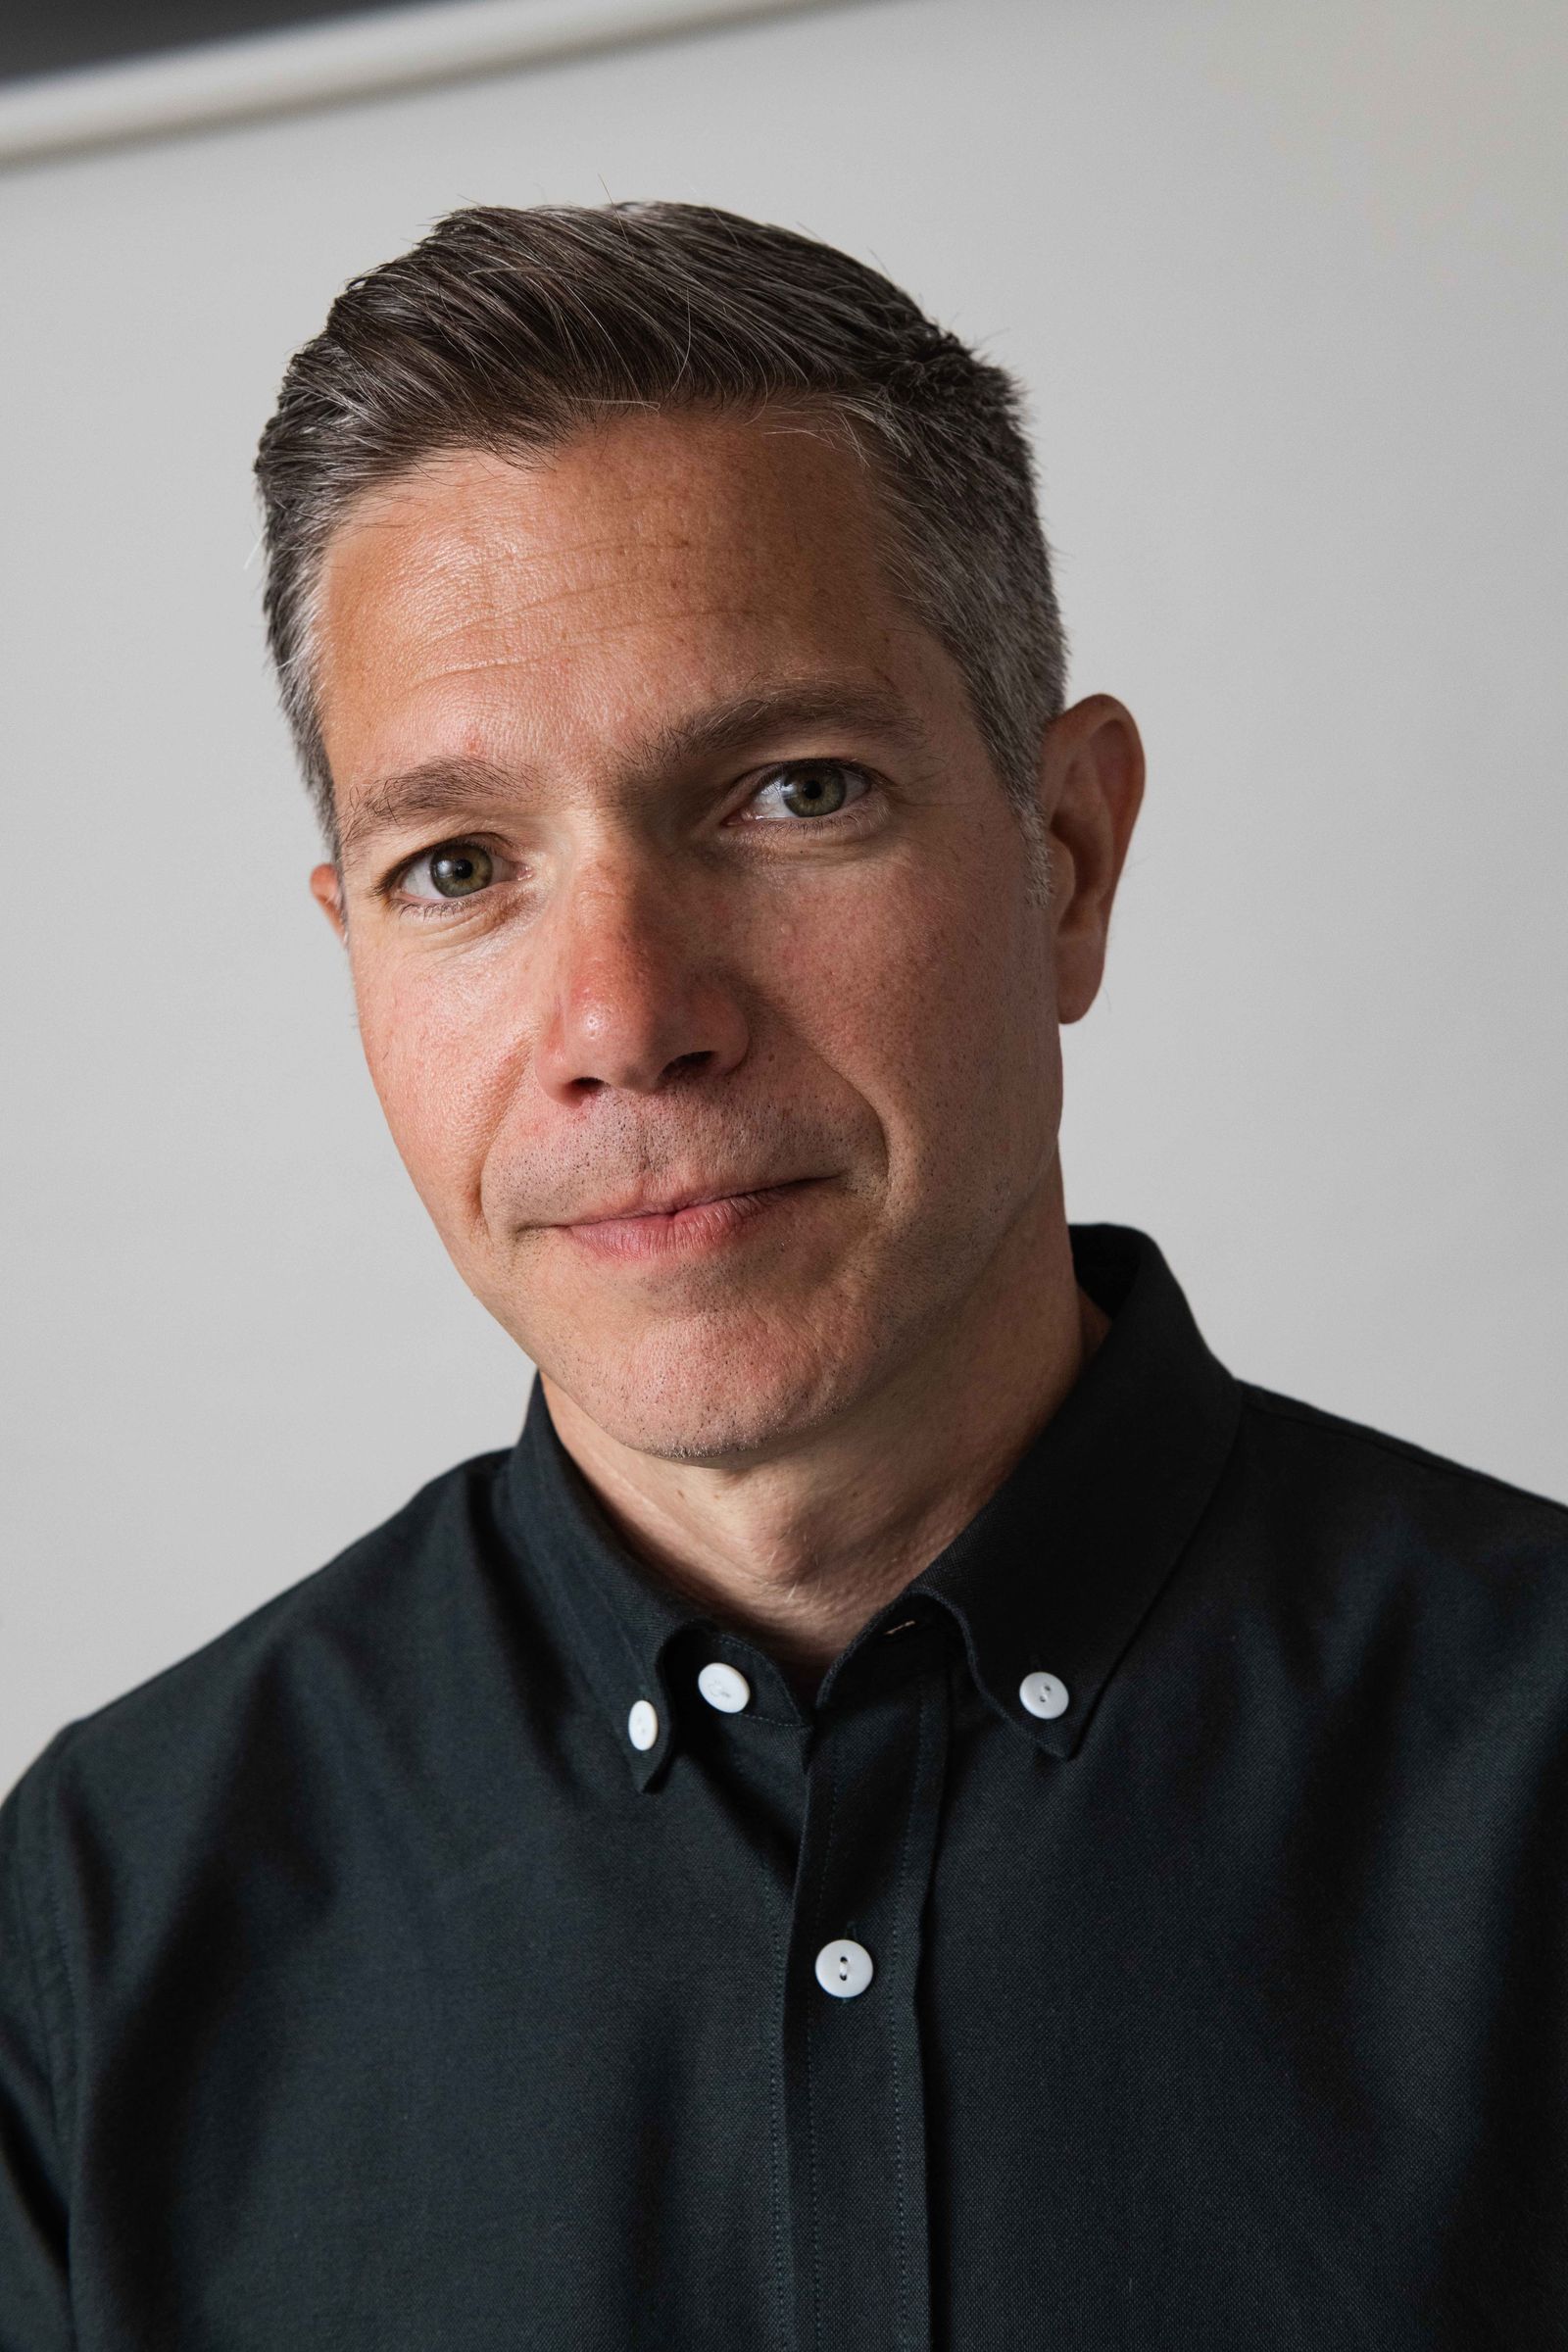 Headshot of Converse CEO Jared Carver